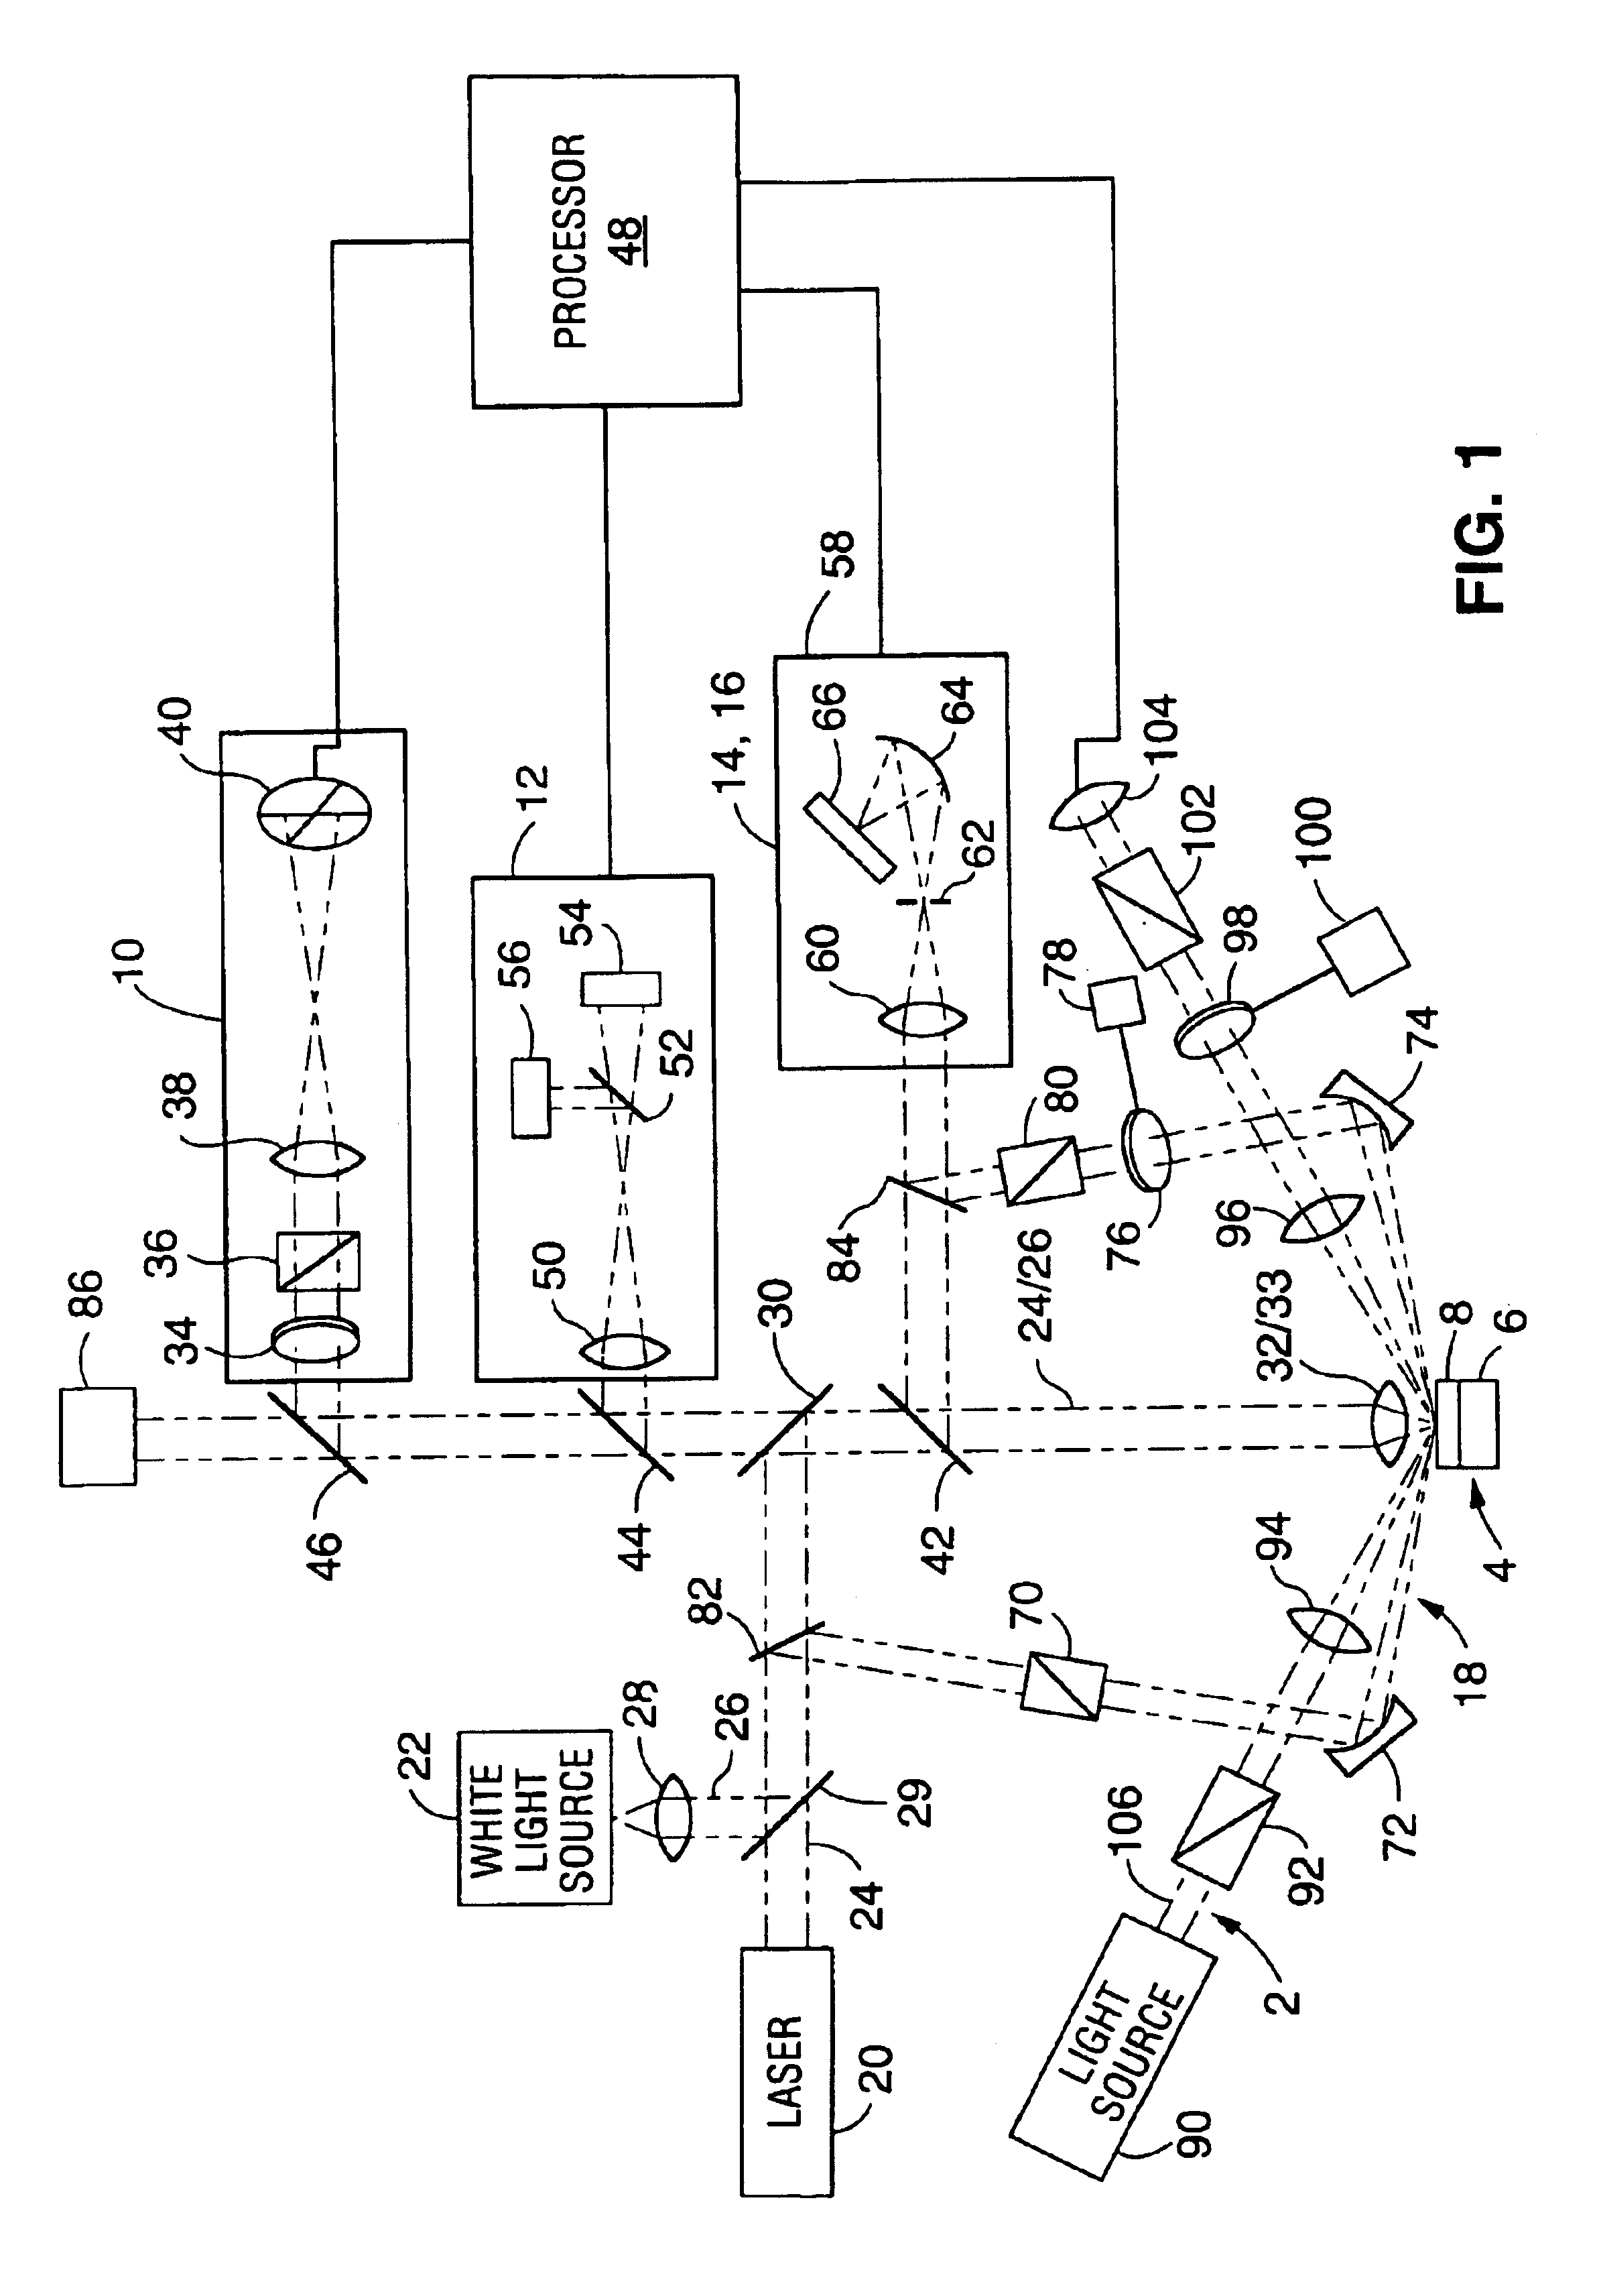 Thin film optical measurement system and method with calibrating ellipsometer